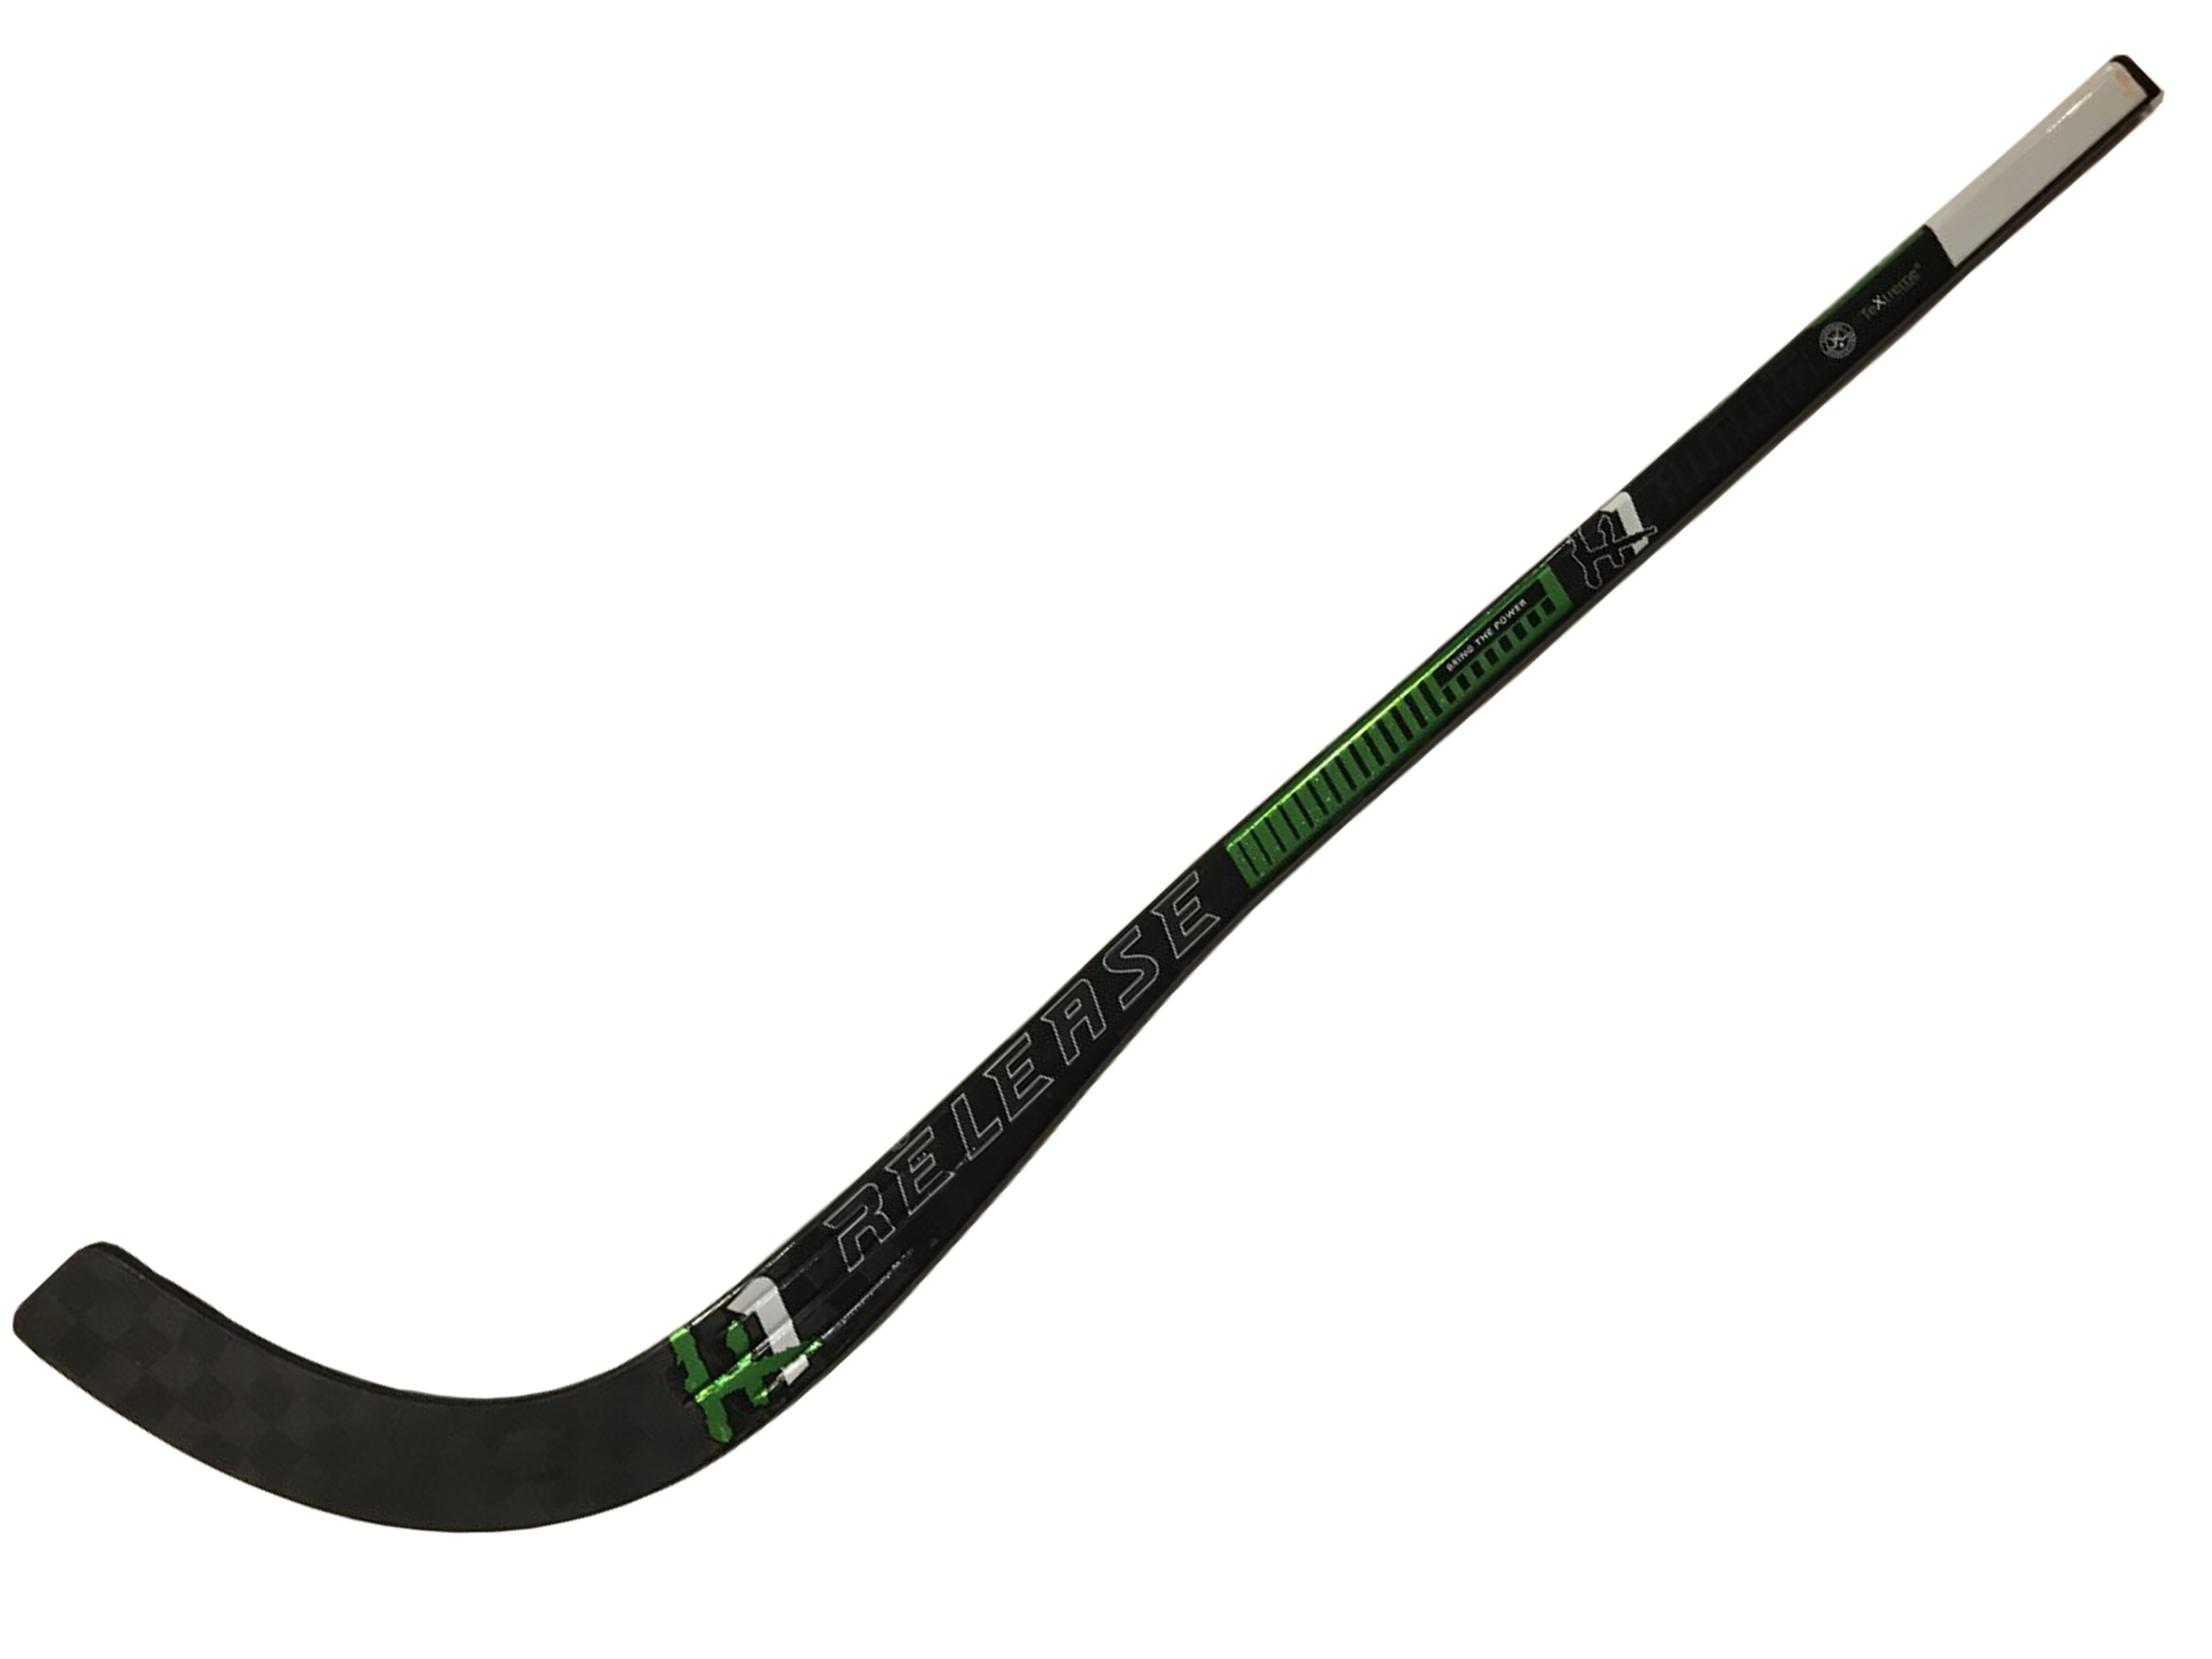 Eventsport presents the next generation of bandy sticks reinforced by TeXtreme®